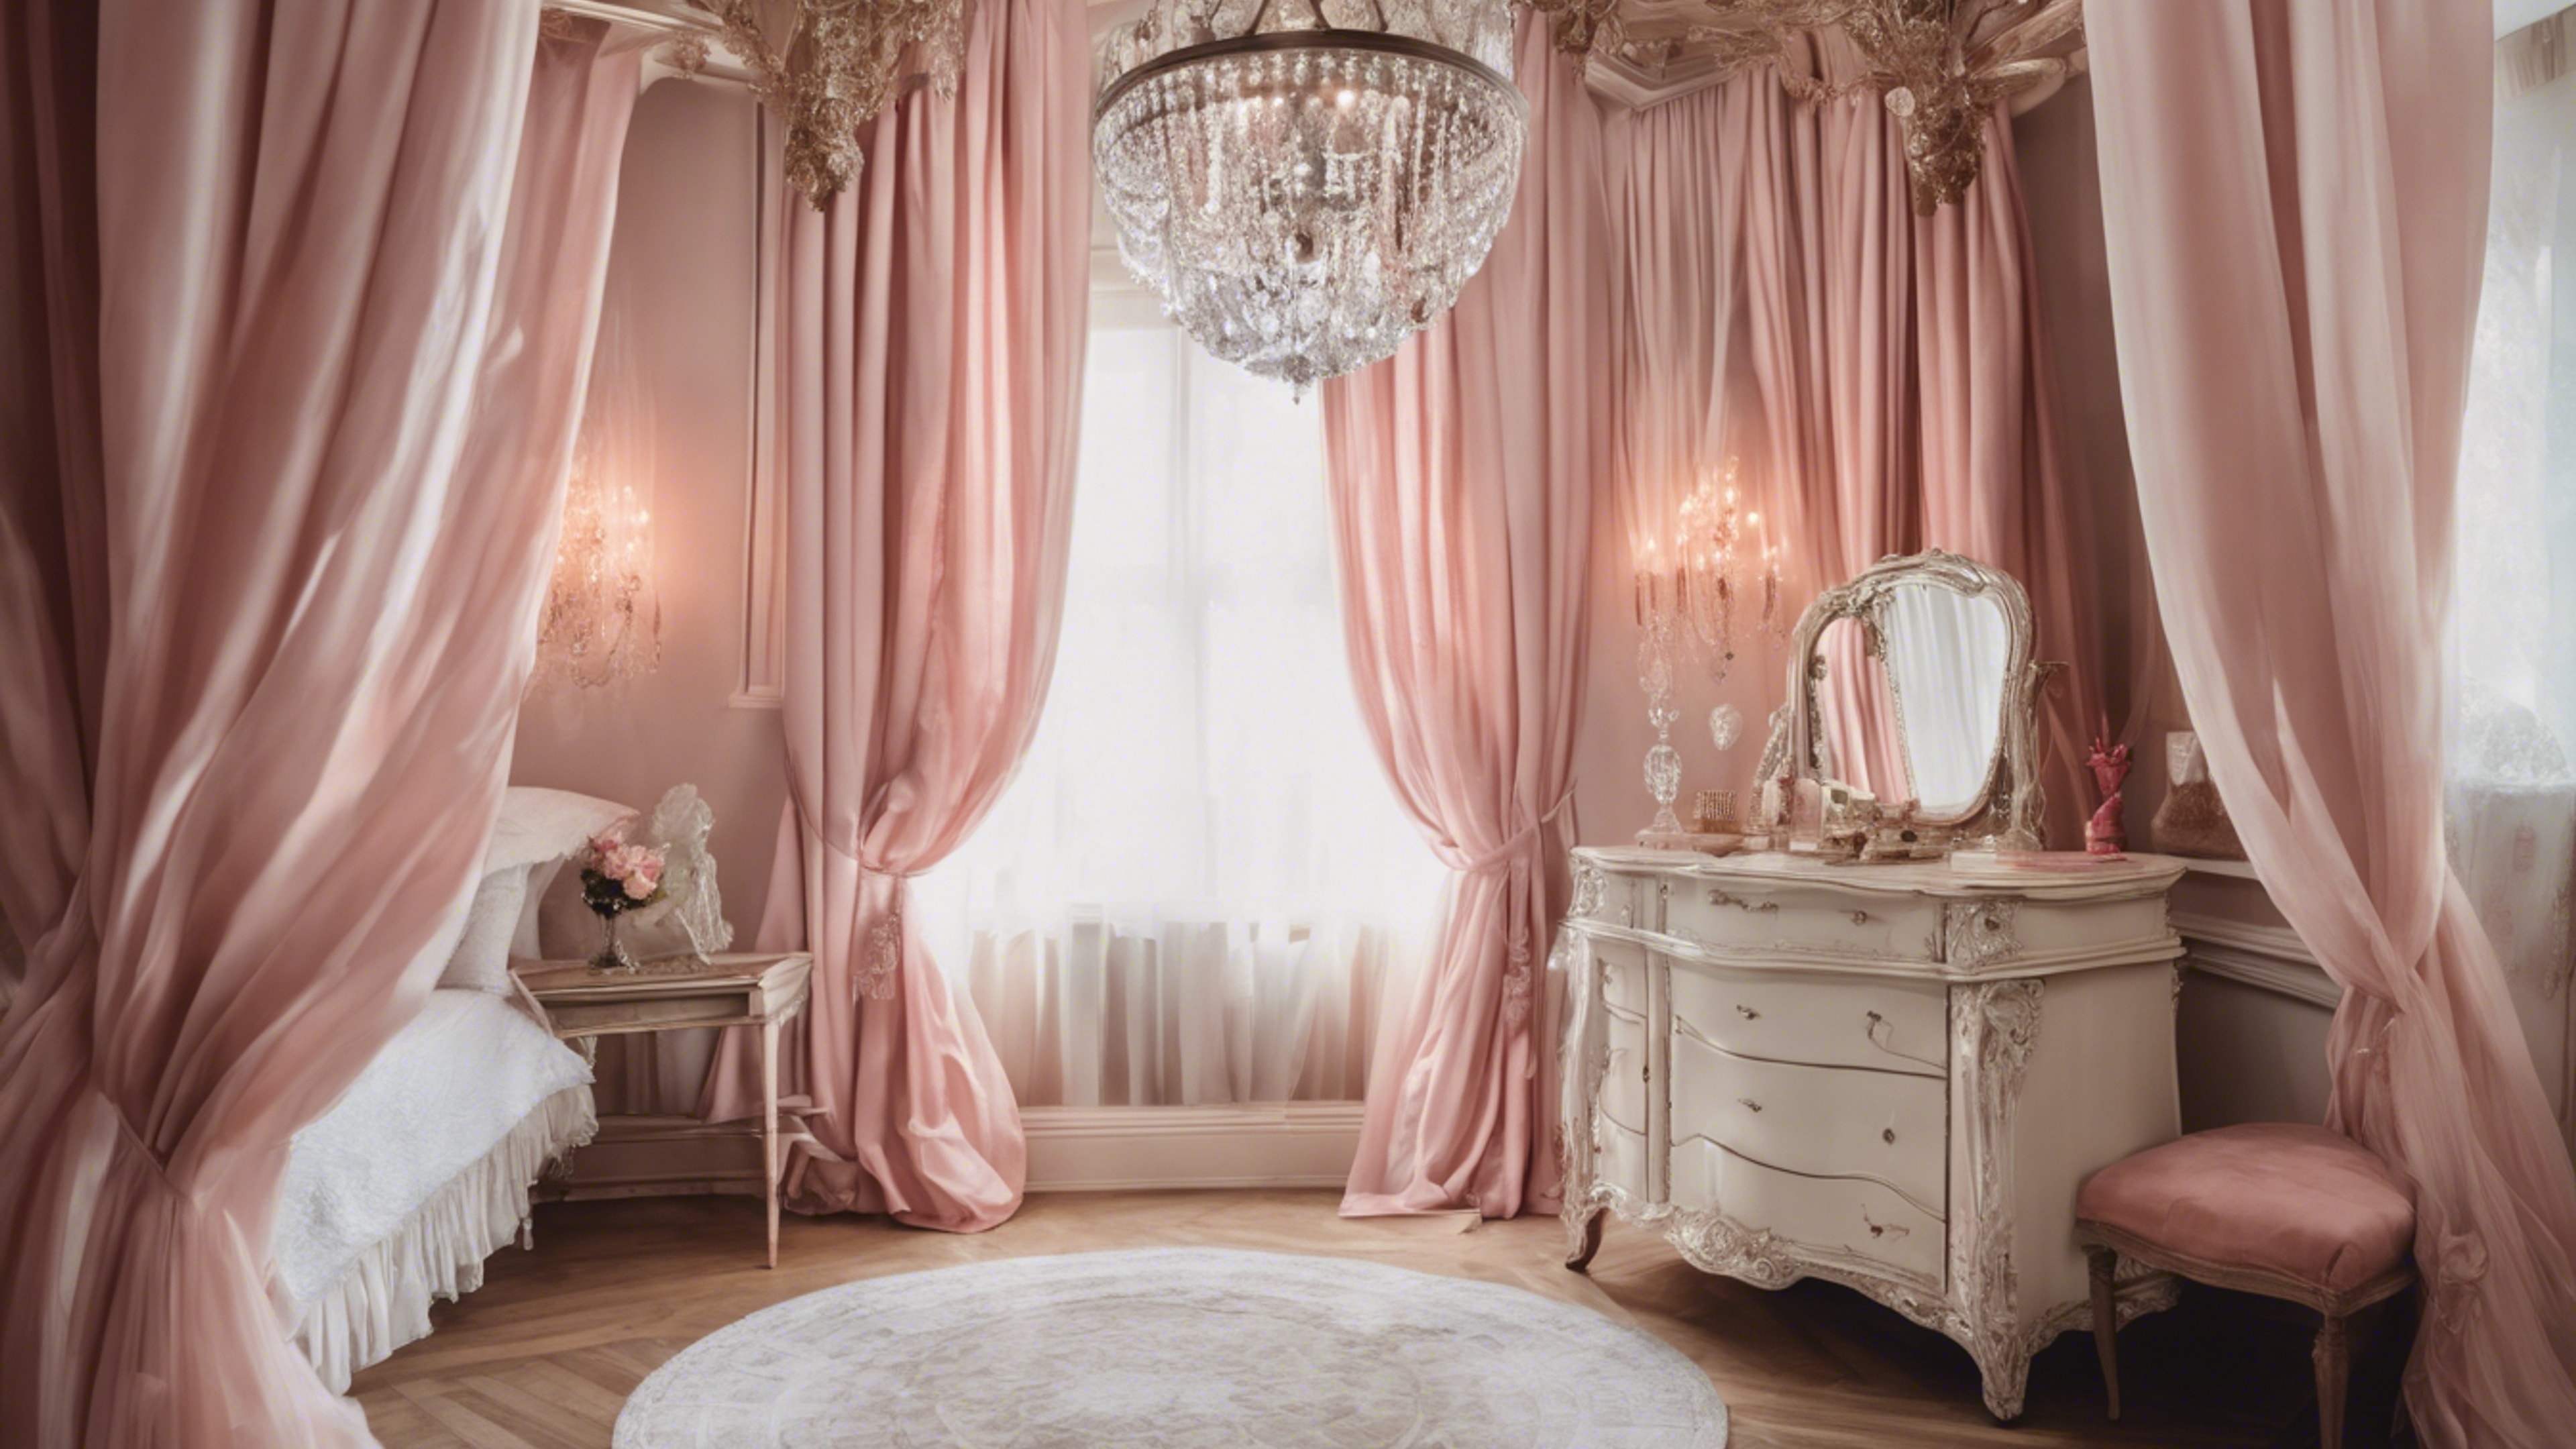 A feminine French bedroom, with canopy bed draped in soft-pink curtains, crystal chandelier hanging overhead, and an elegant antique vanity. Tapeta na zeď[9a96ceac1df24dd59ae9]